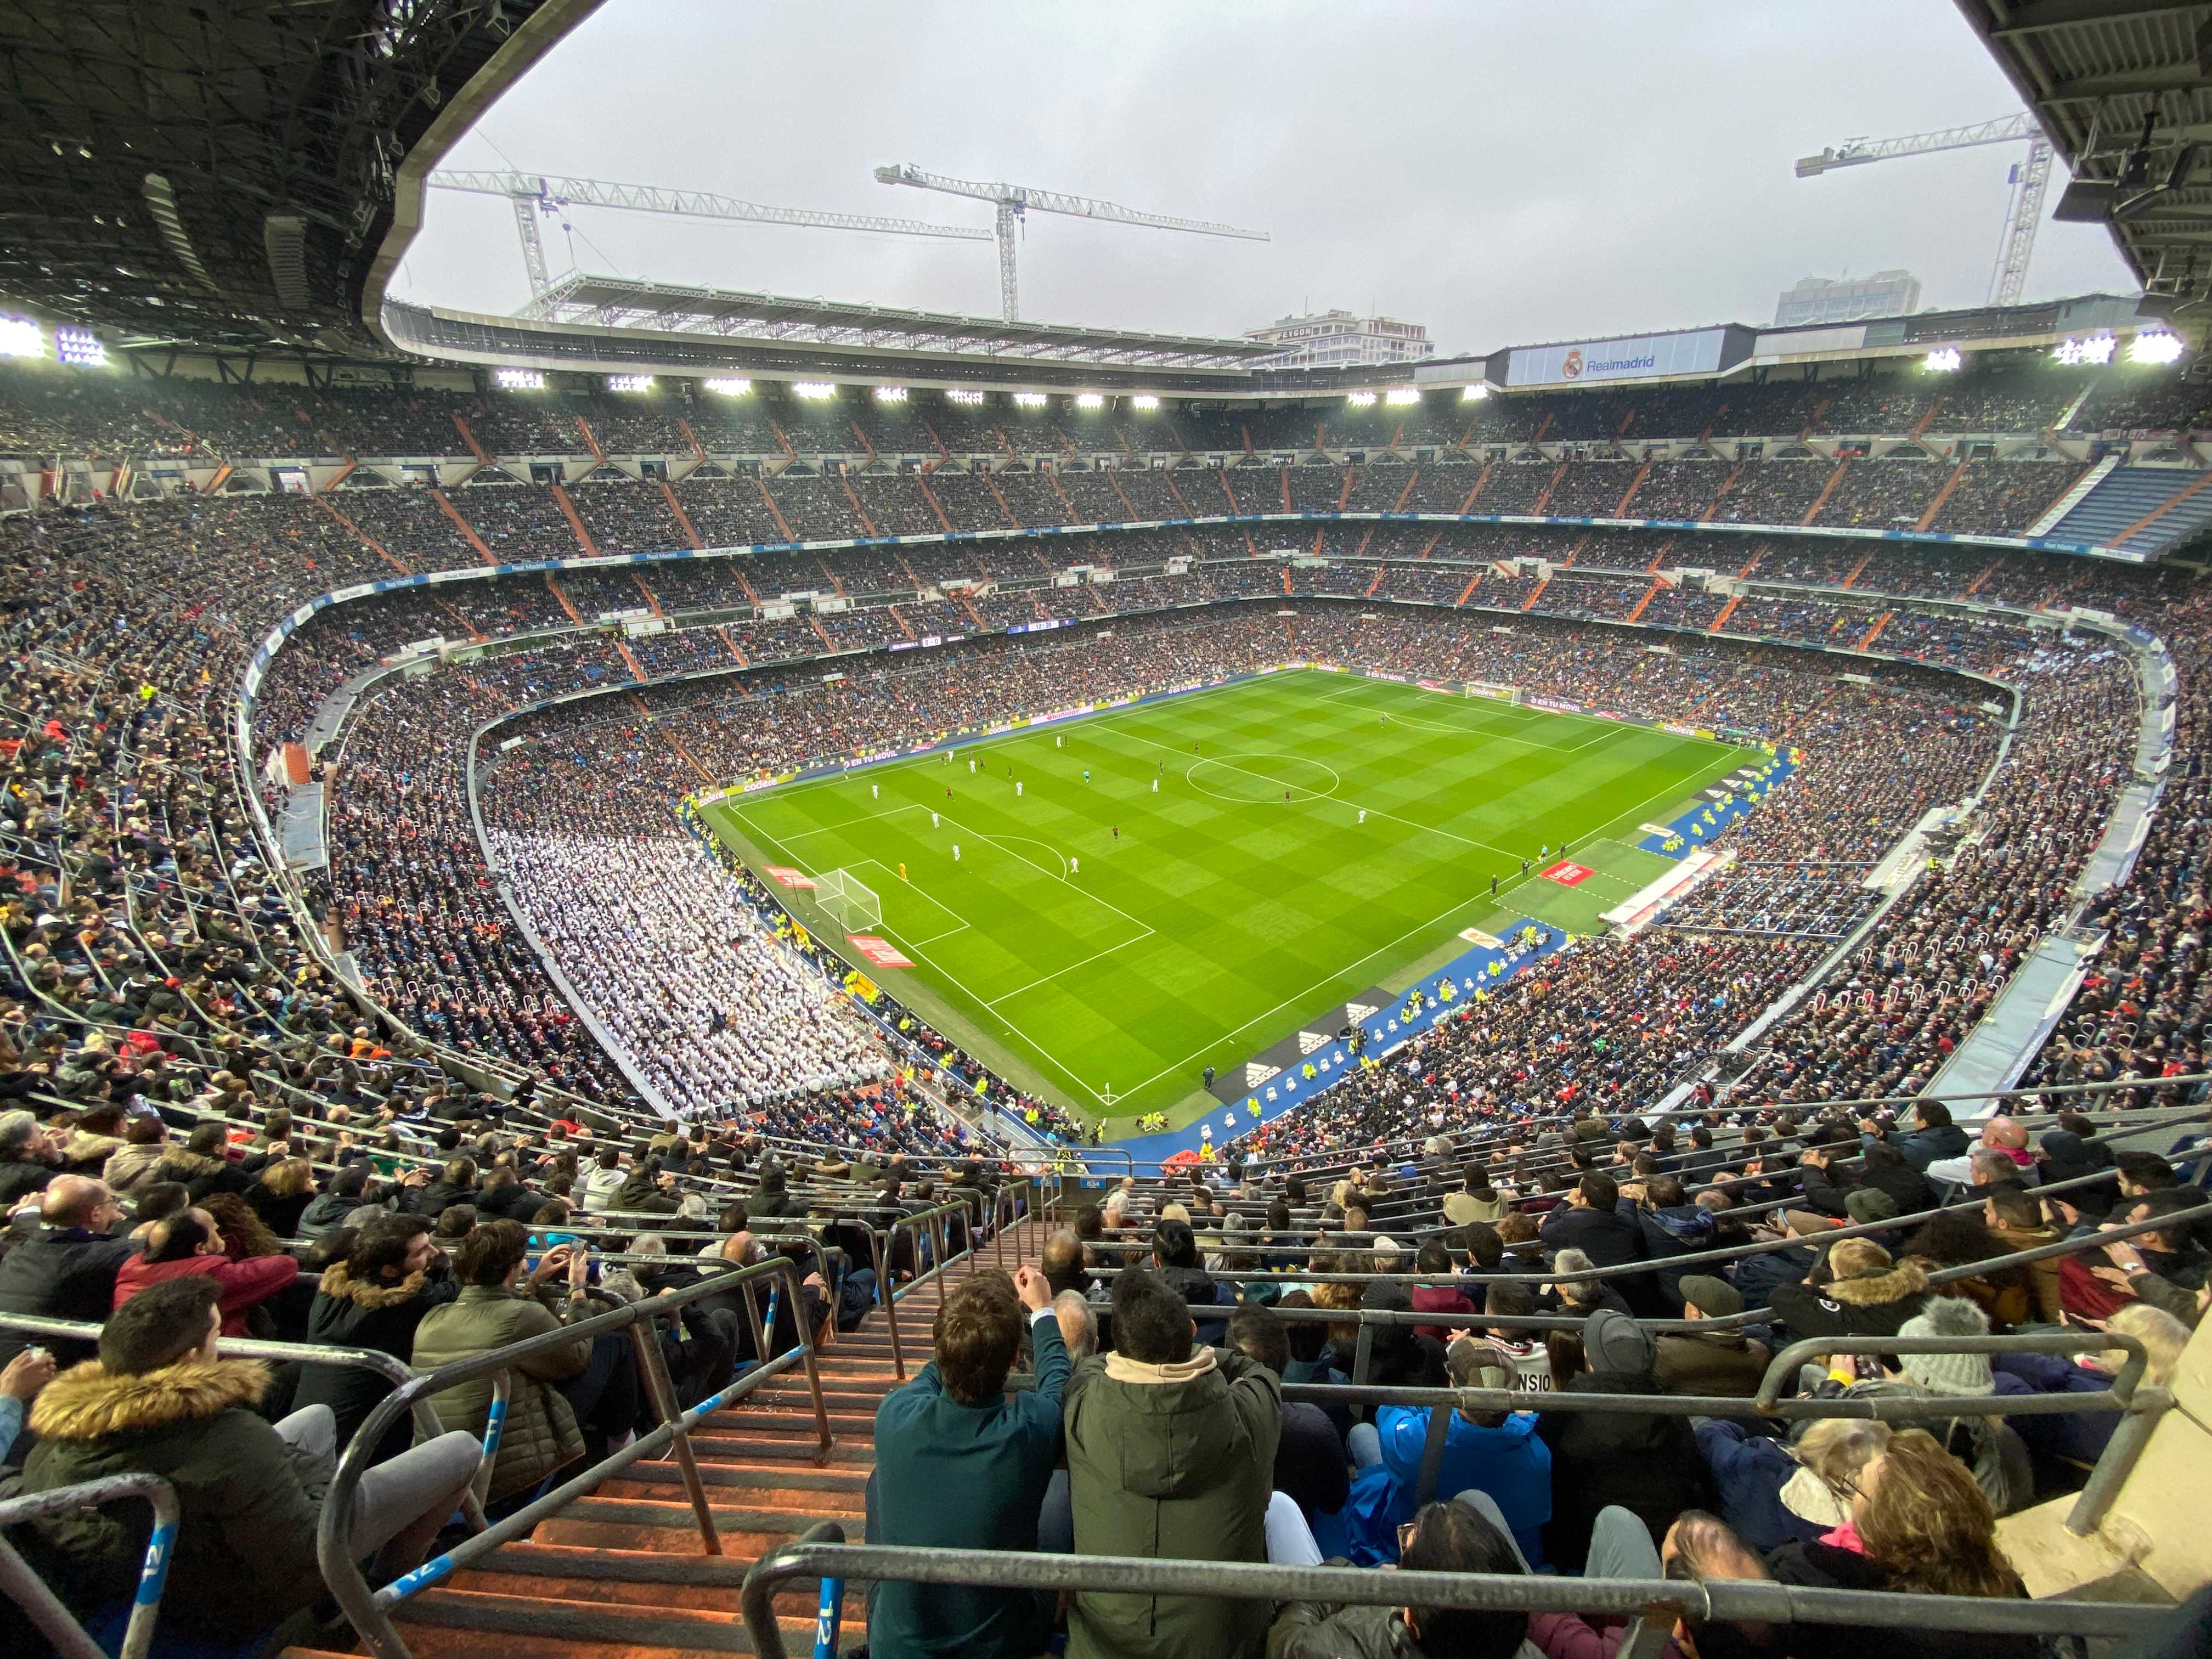 A wide angle view of Estadio Santiago Bernabéu, the stadium of the Real Madrid soccer team. The players are tiny on the green pitch, and the massive stadium is visible on all sides, filled with people.